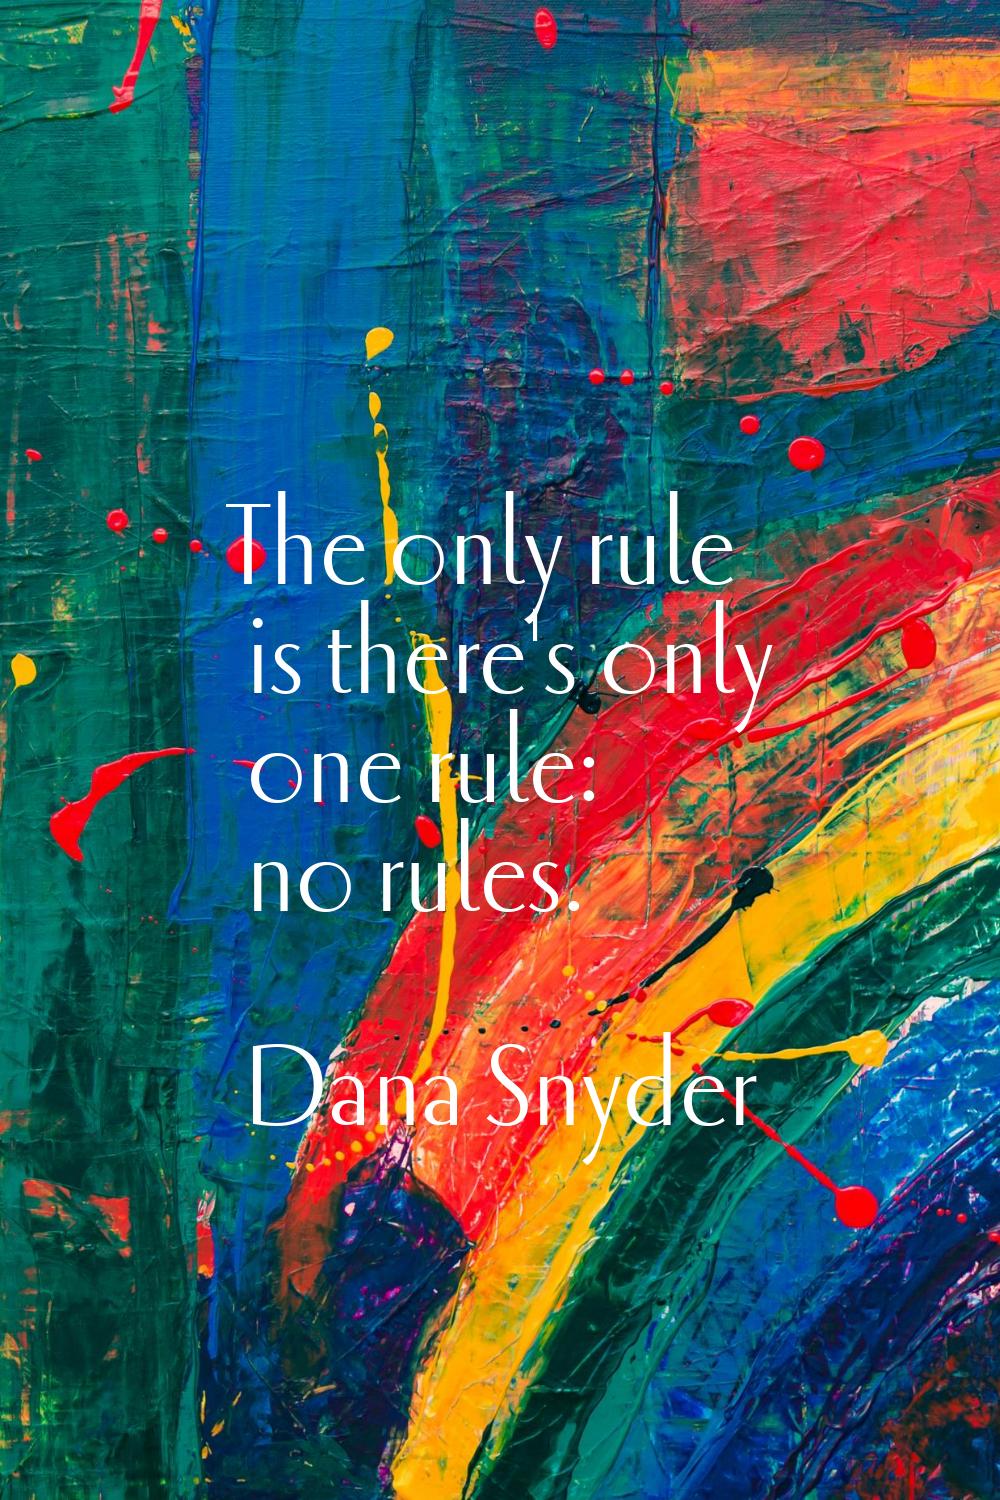 The only rule is there's only one rule: no rules.